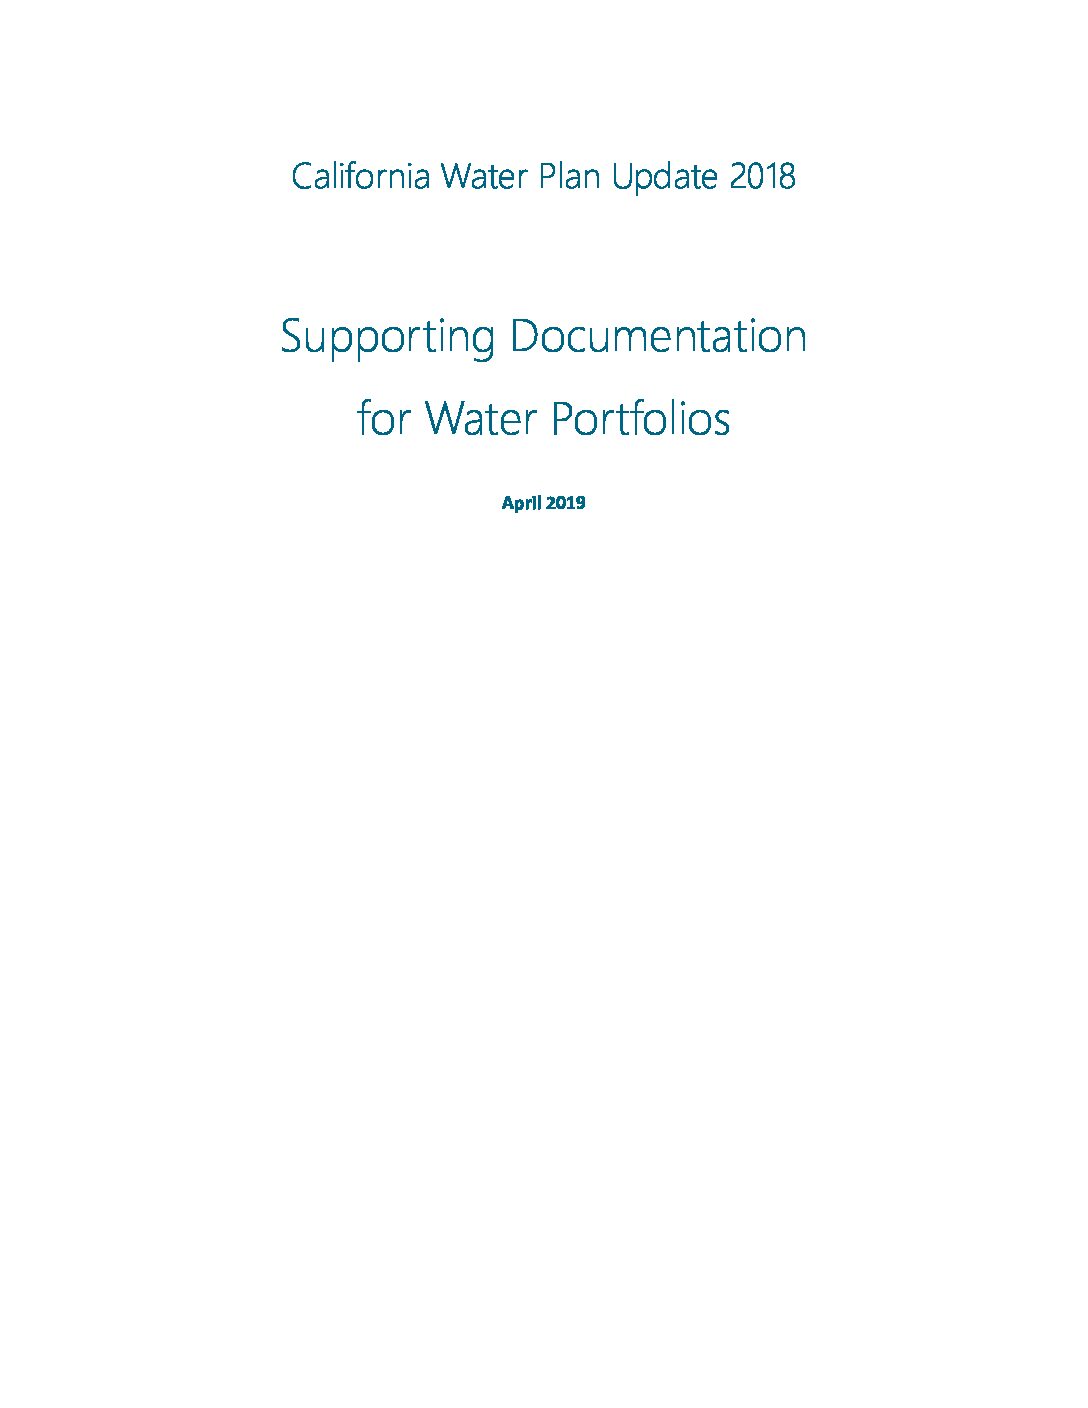 California Water Plan Update 2018, Supporting Documentation for Water Portfolios